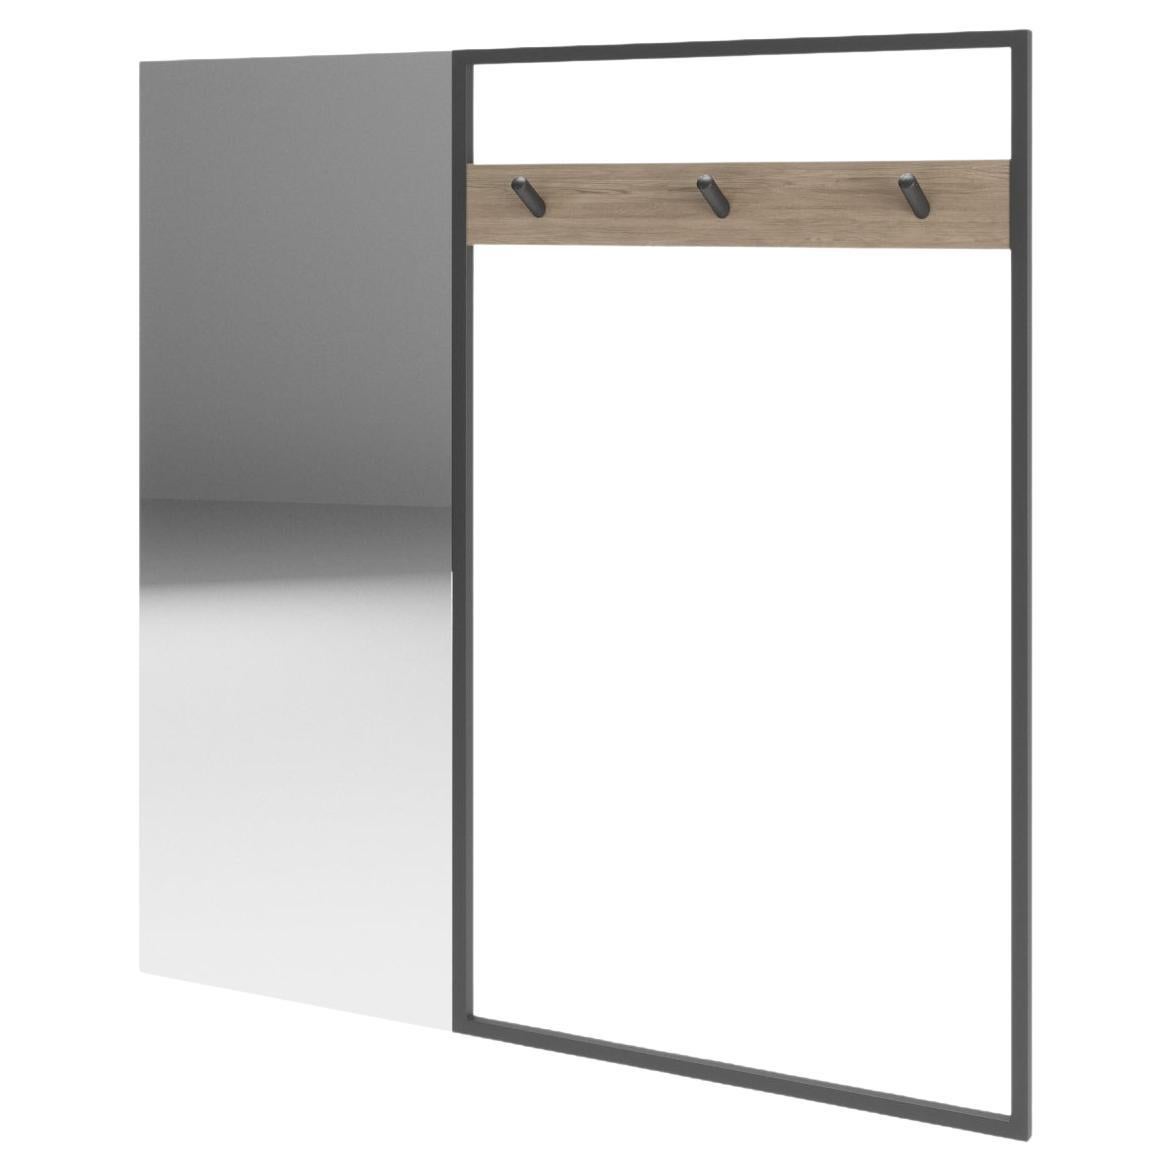 SlideWall Hanger and Mirror For Sale